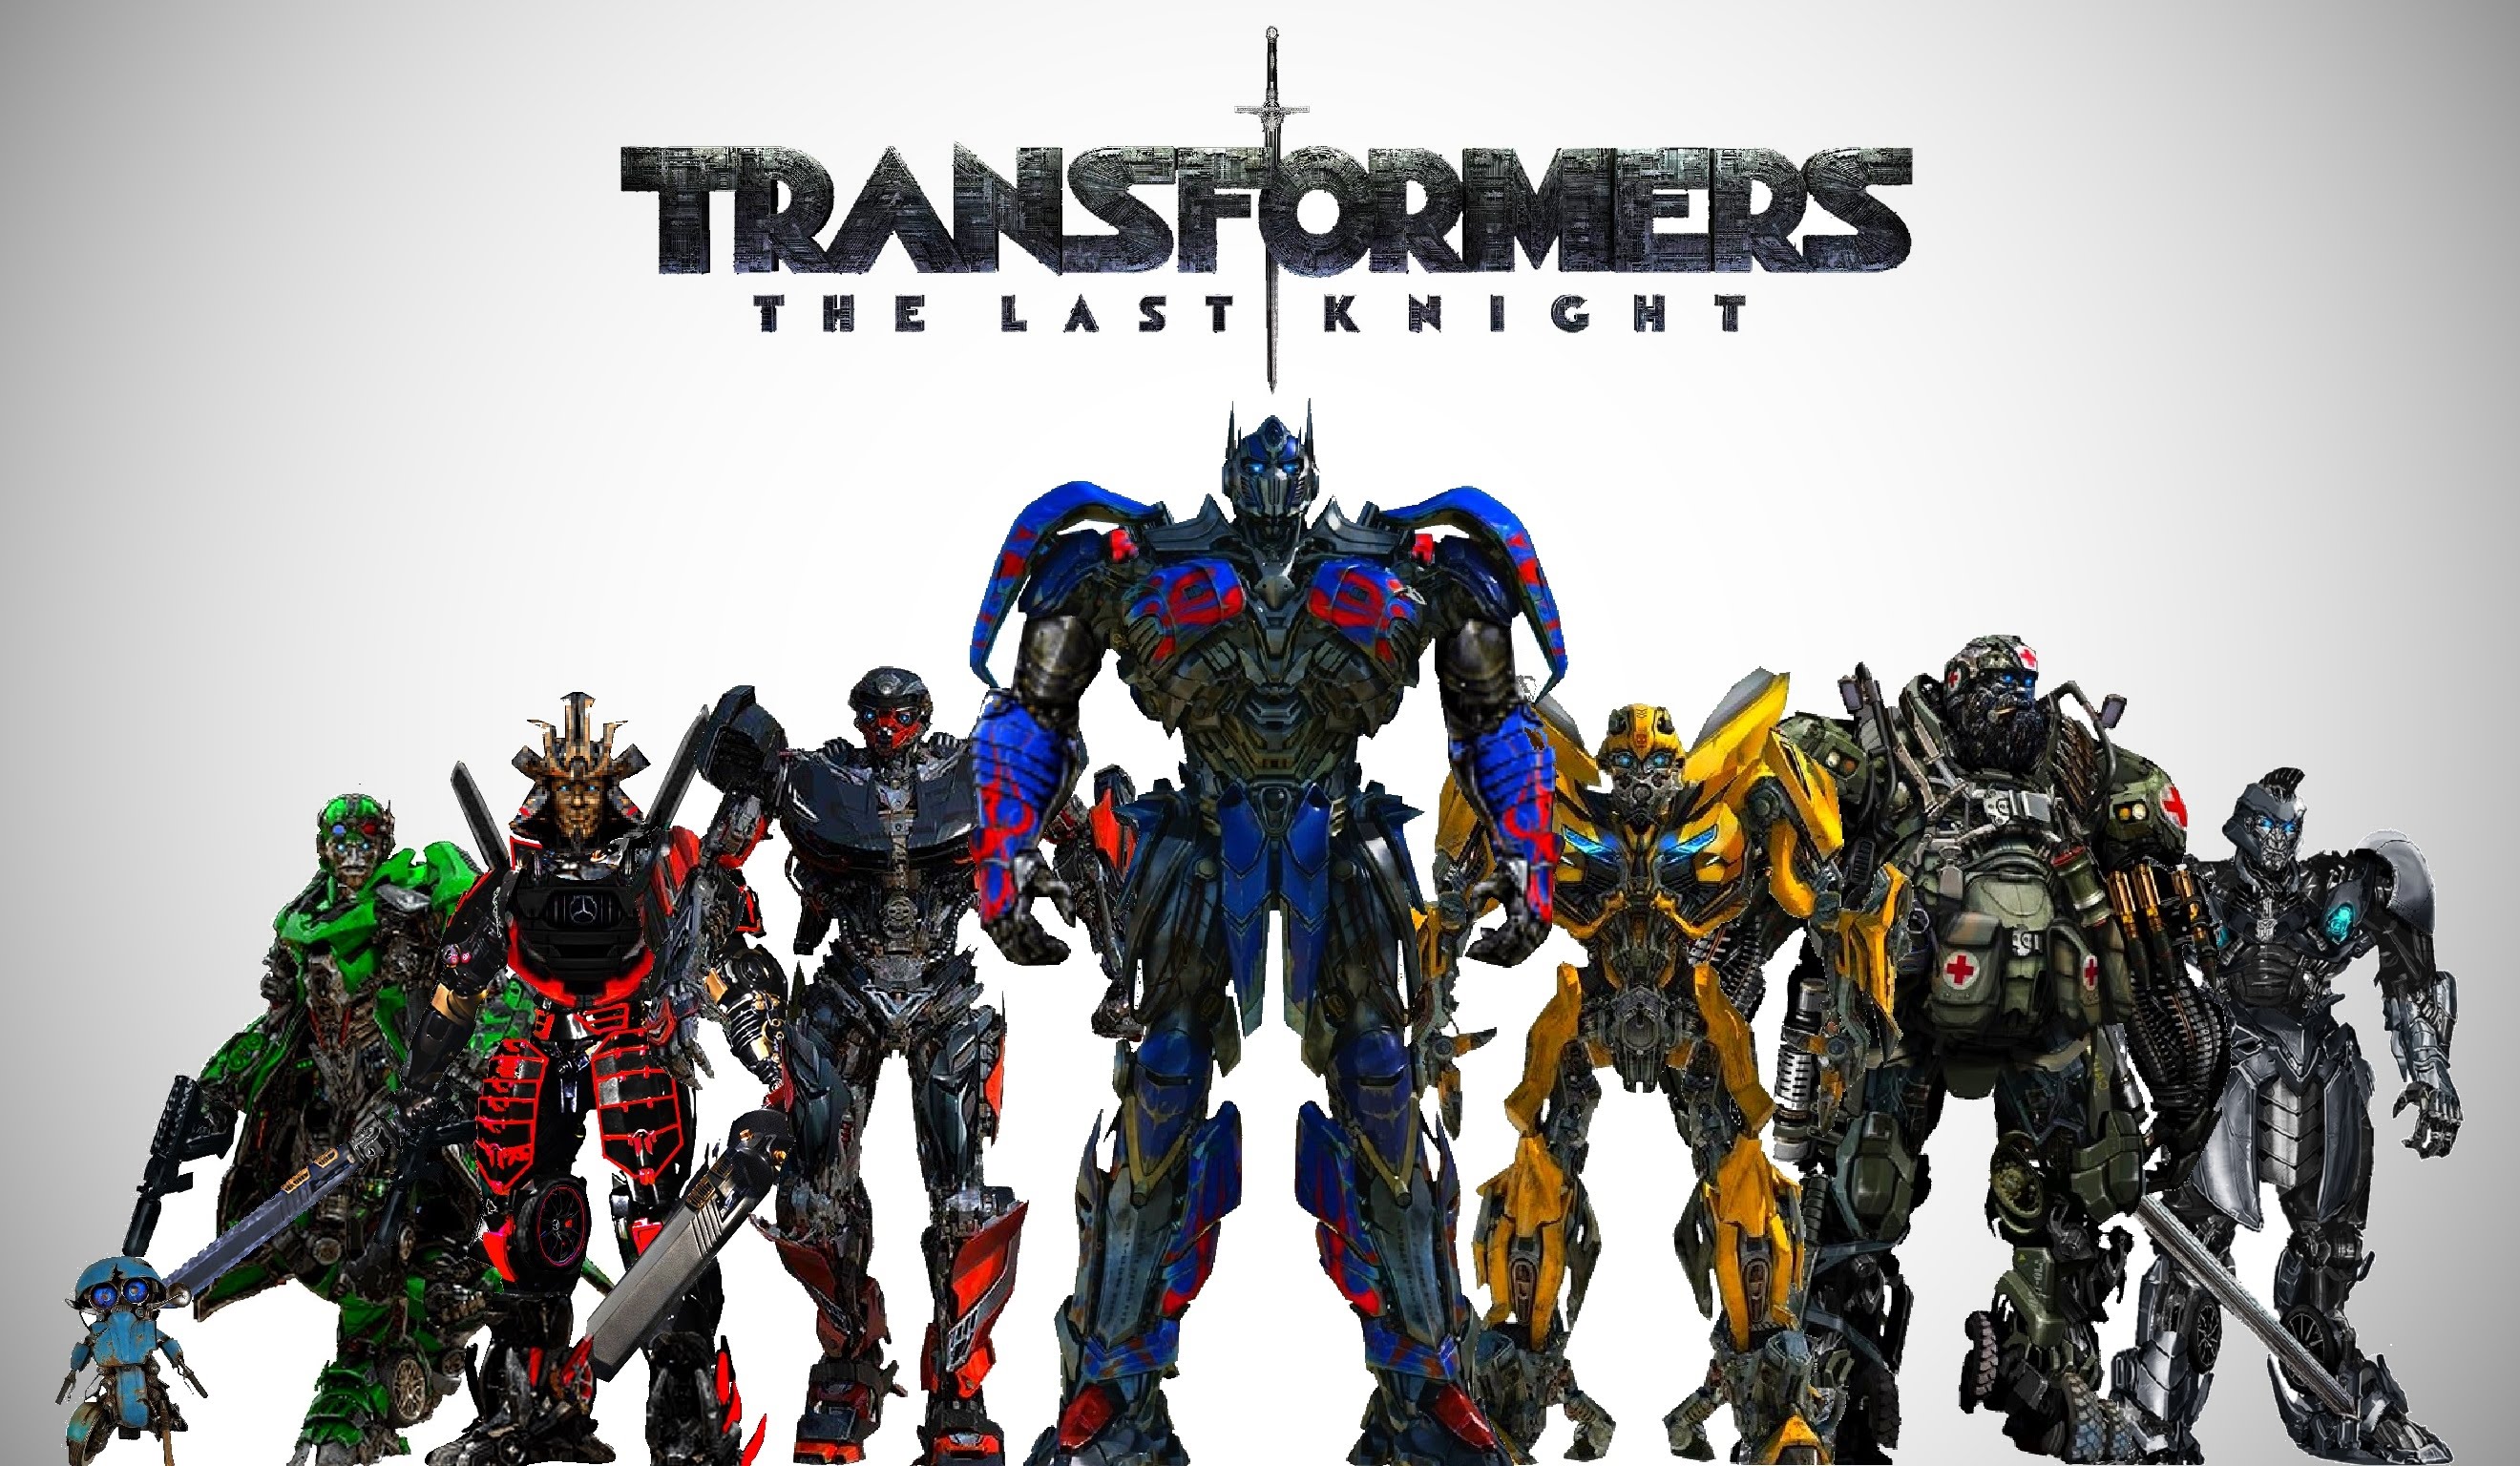 ‘Transformers: The Last Knight’ Doesn’t Even Try to Be Good: Spoiler-Free Review